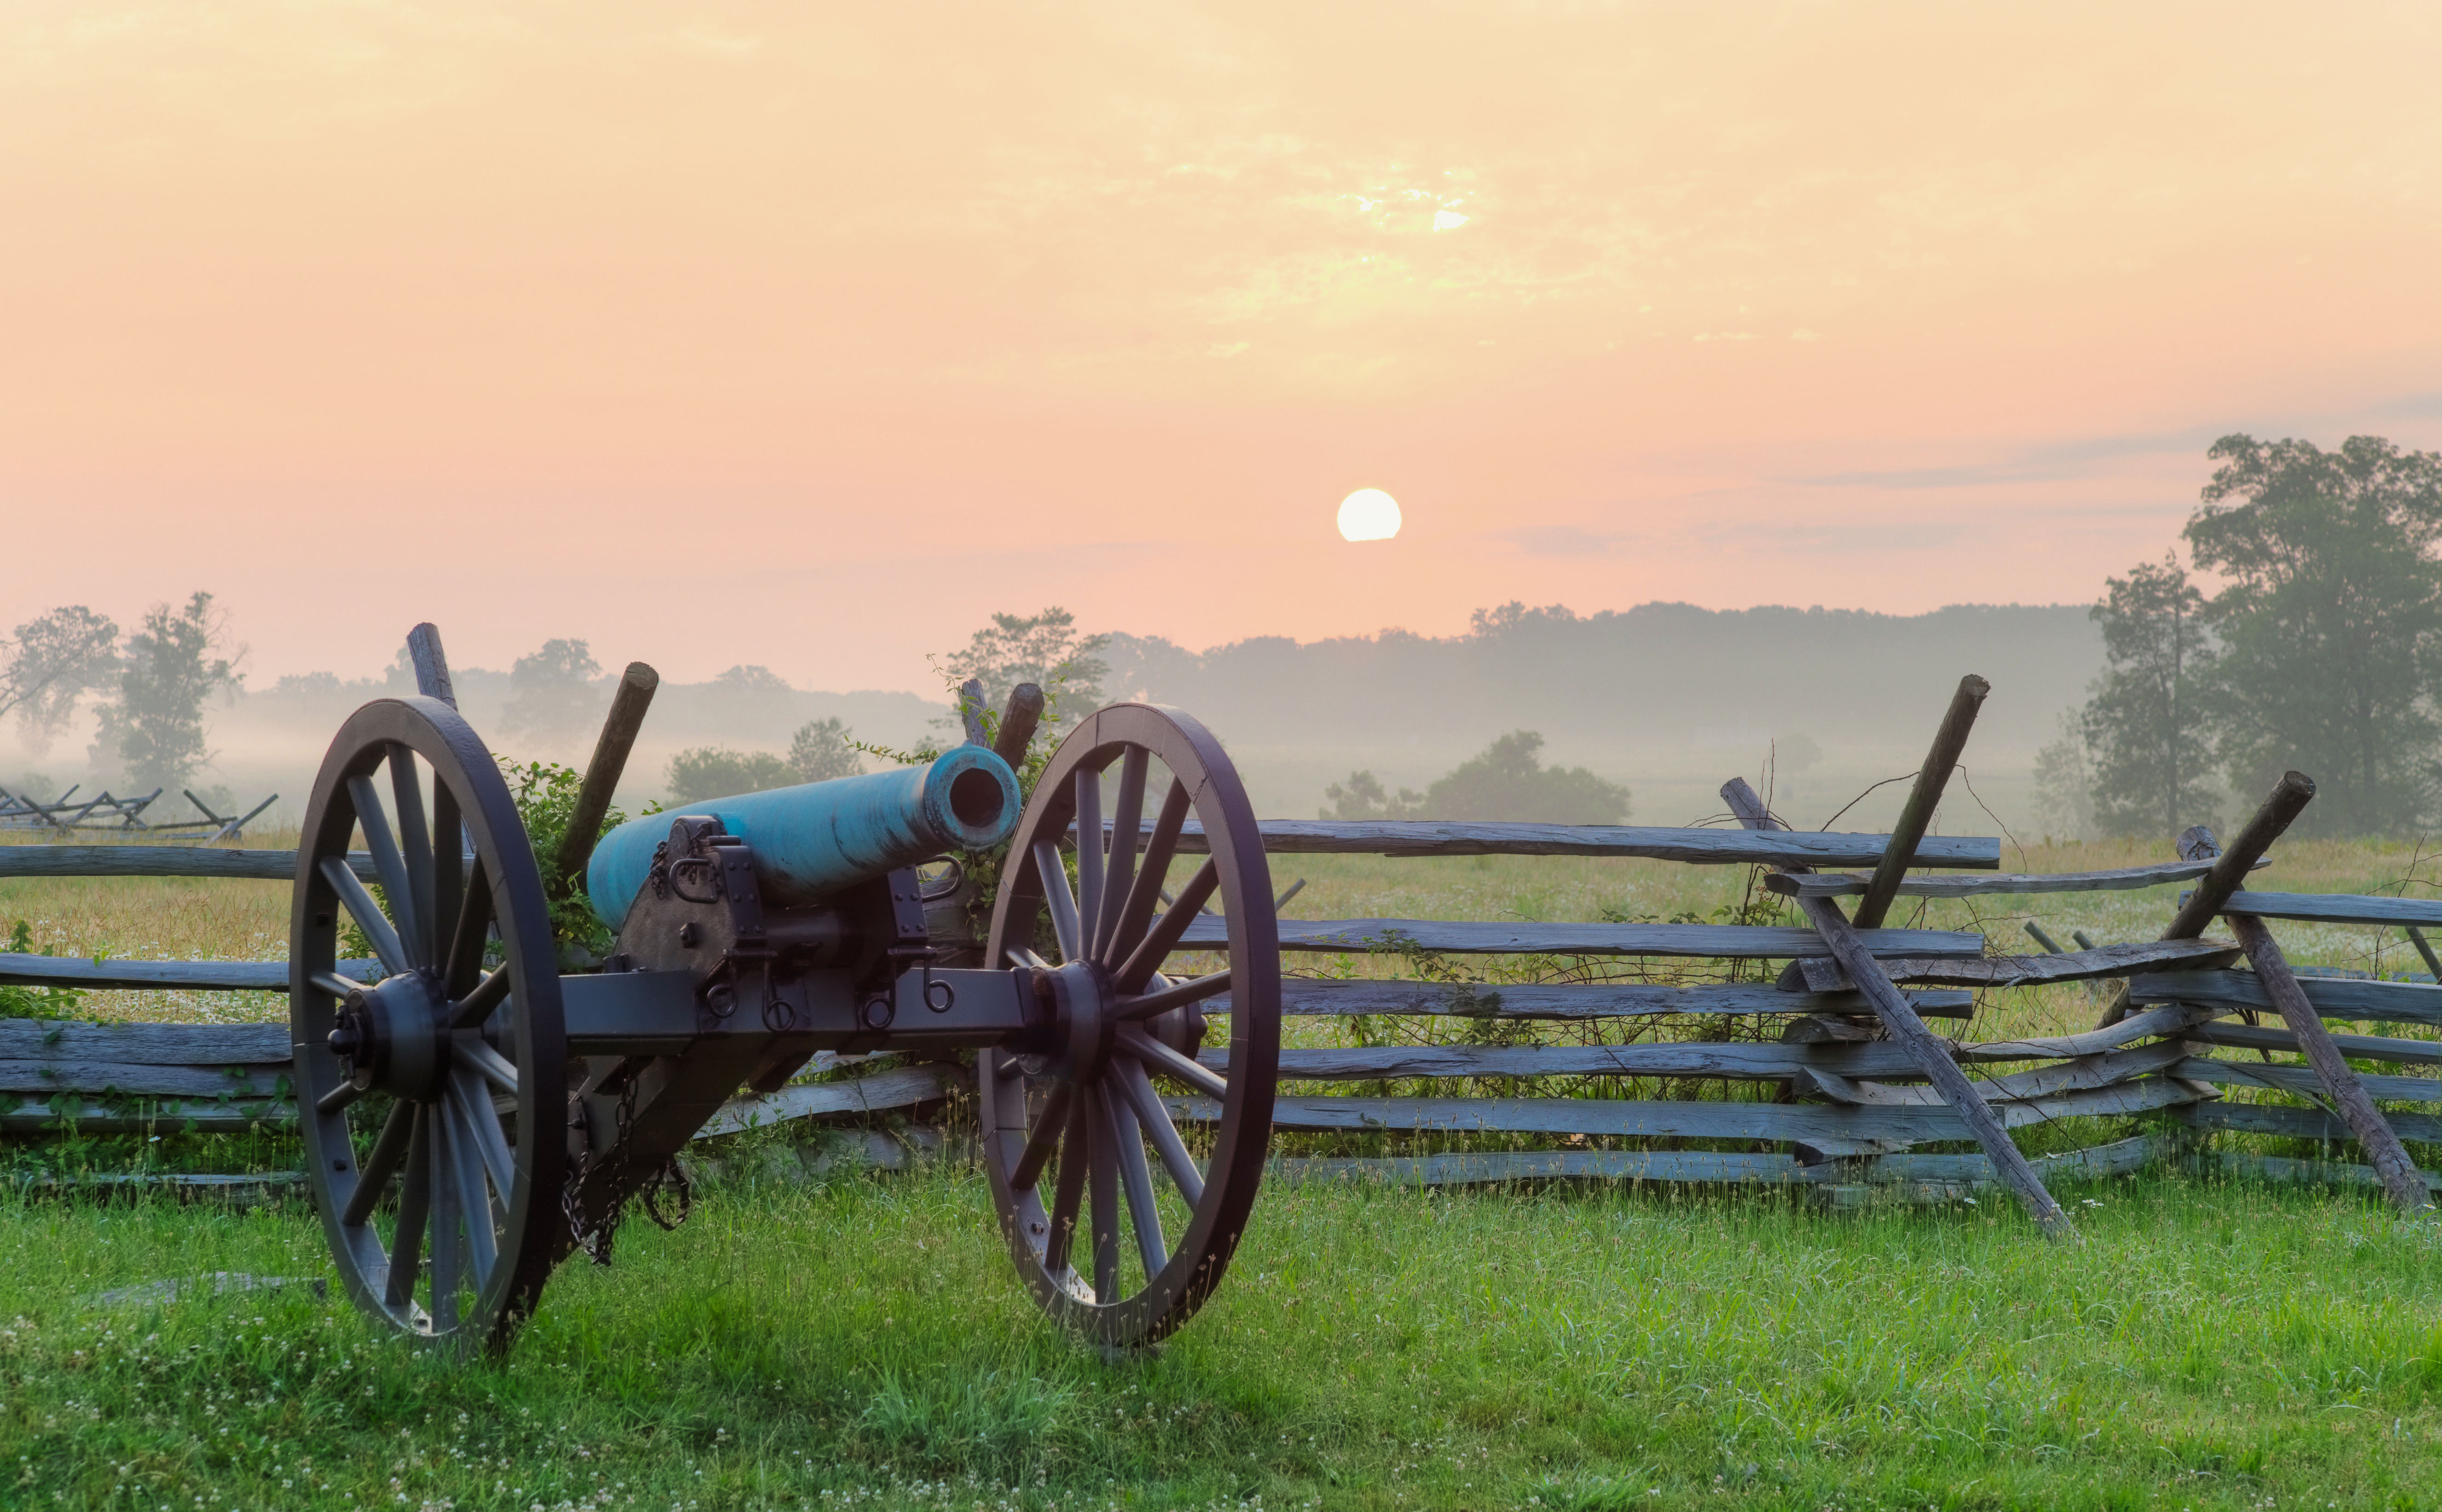 Gettysburg was the scene of one of the bloodiest and most famous battles of the US Civil War. Image by Tetra Images / Getty Images